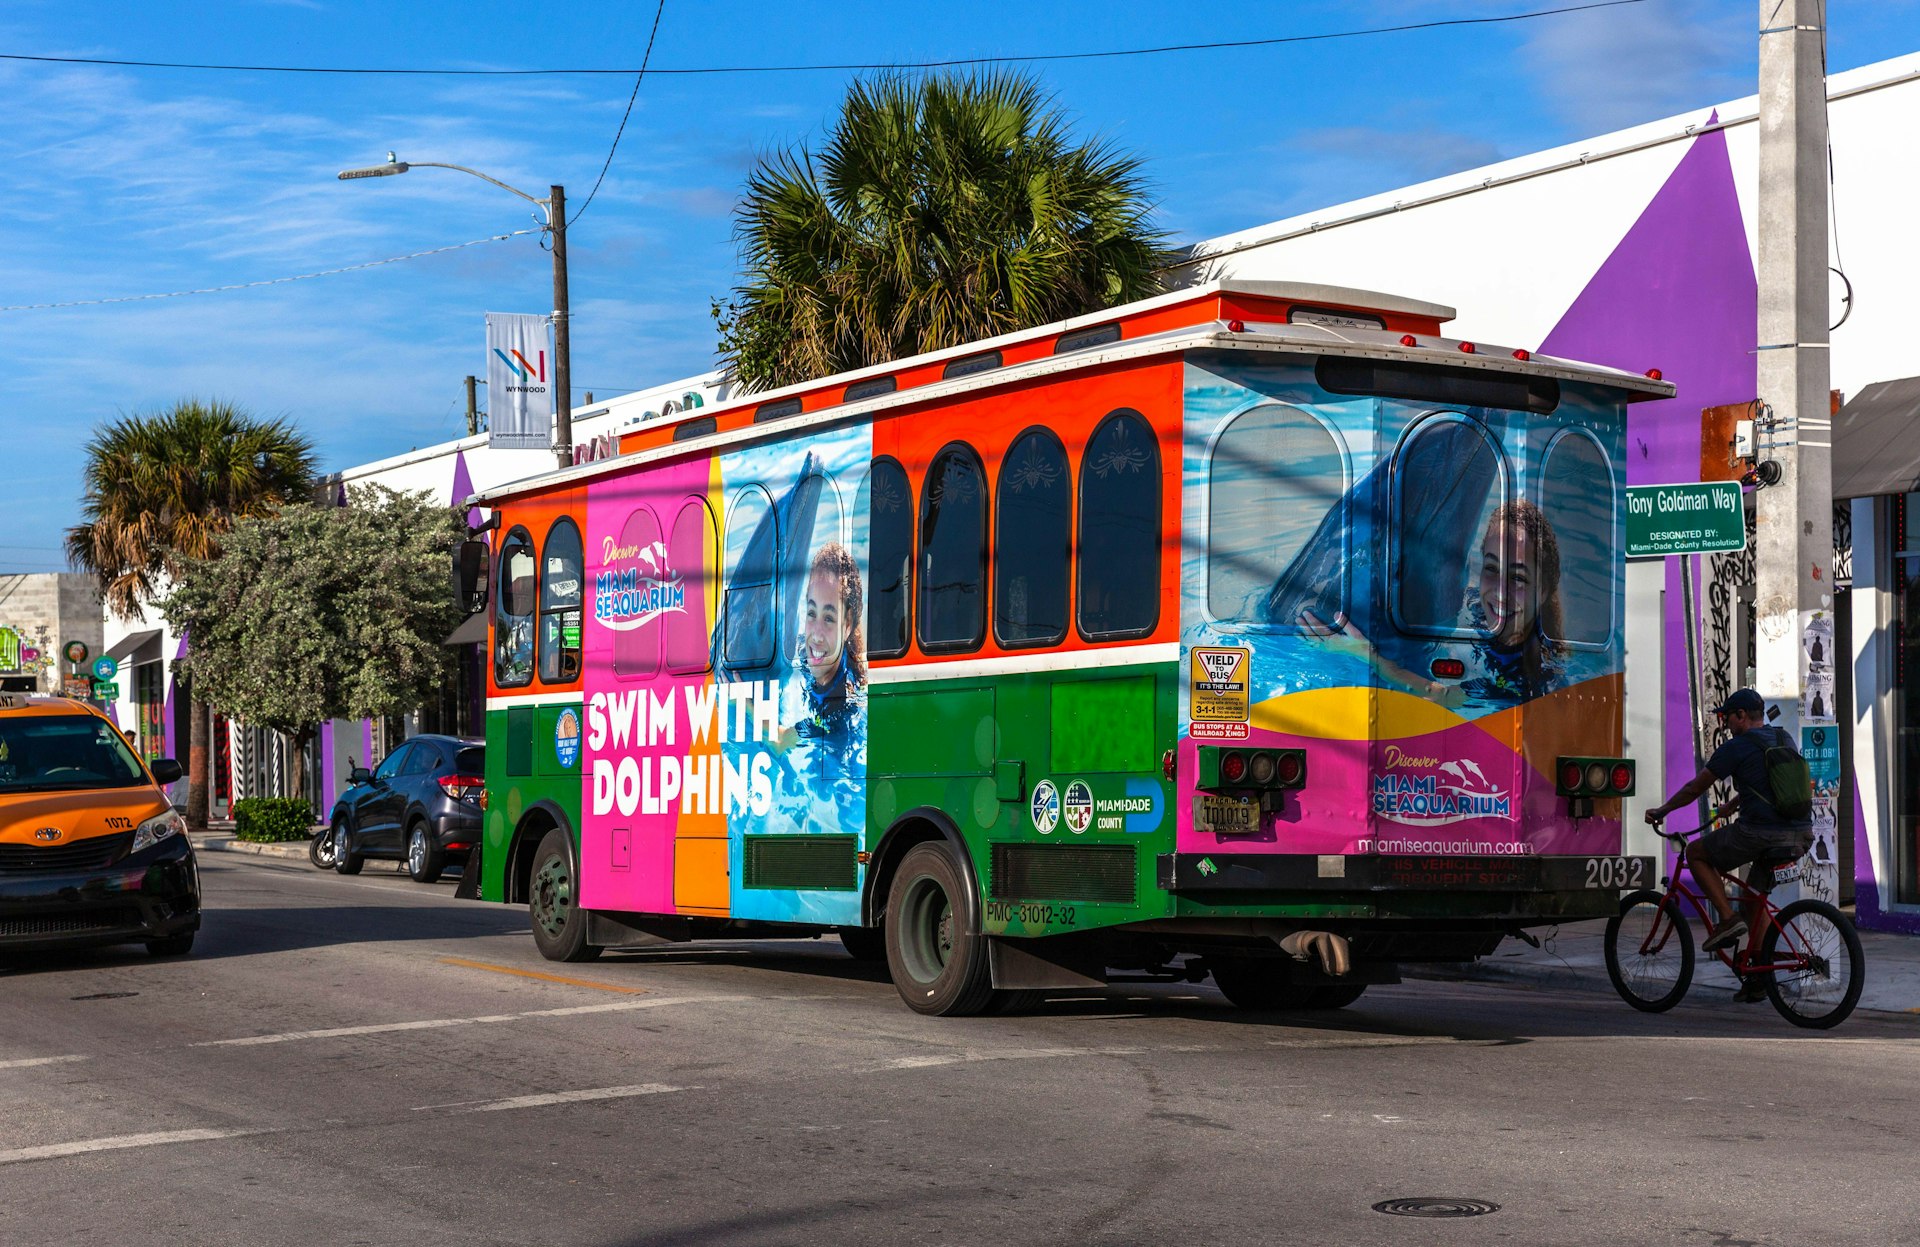 The rear view of a colourful trolley bus going through the Wynwood Art District, Miami, Florida, USA.